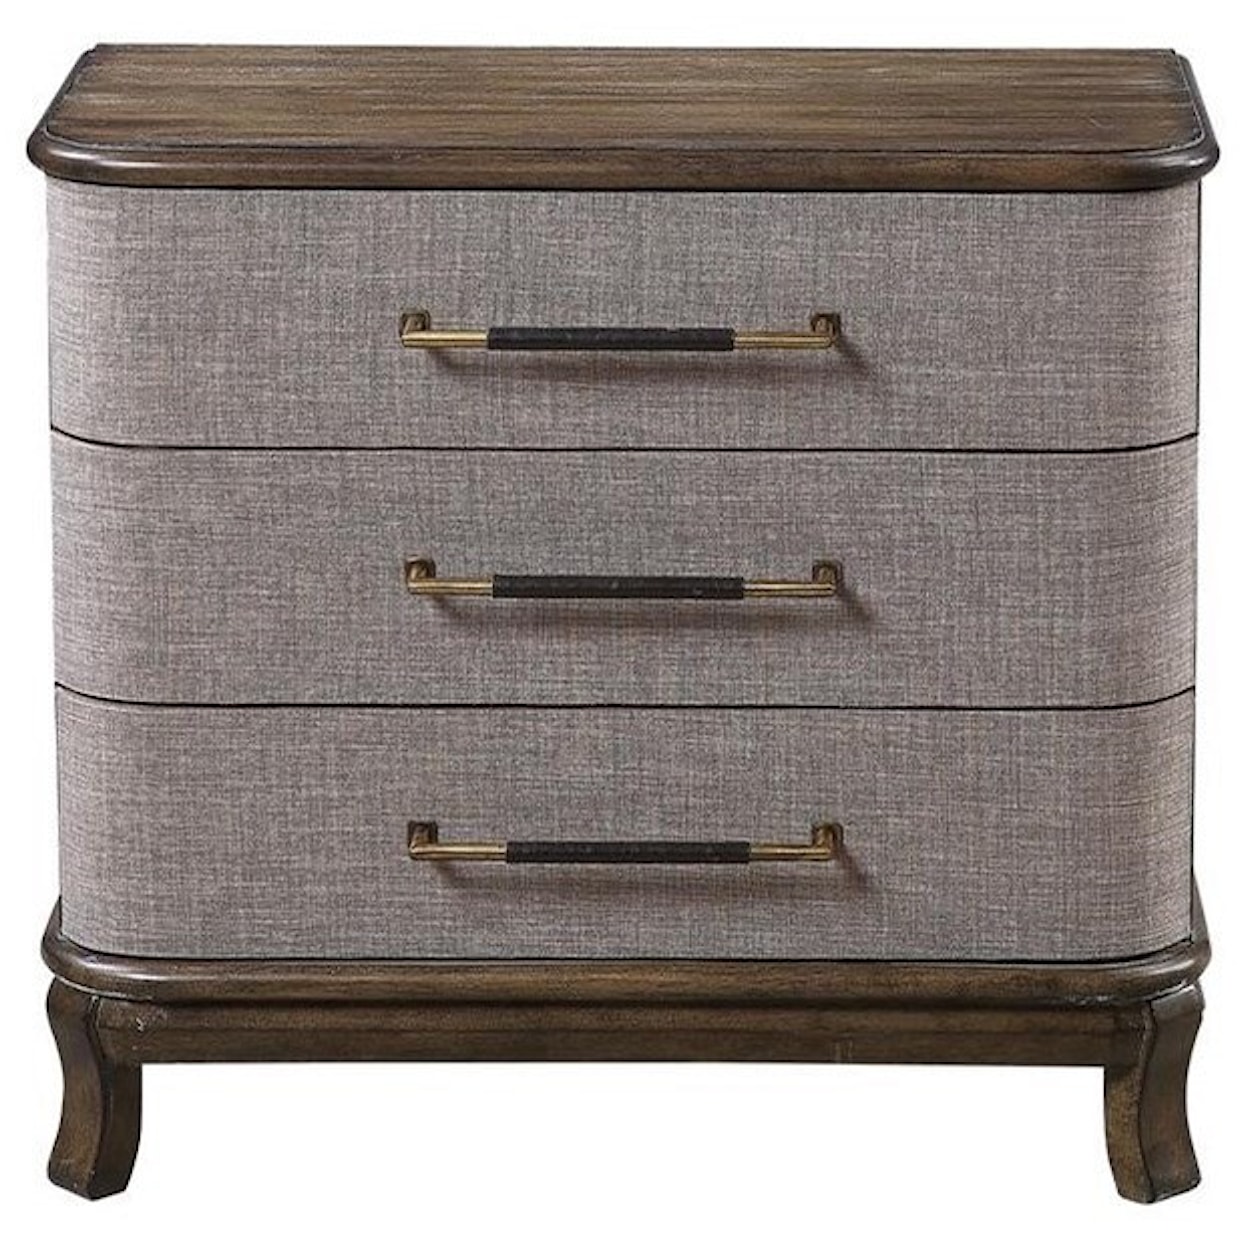 Coast2Coast Home Accents 3-Drawer Chest